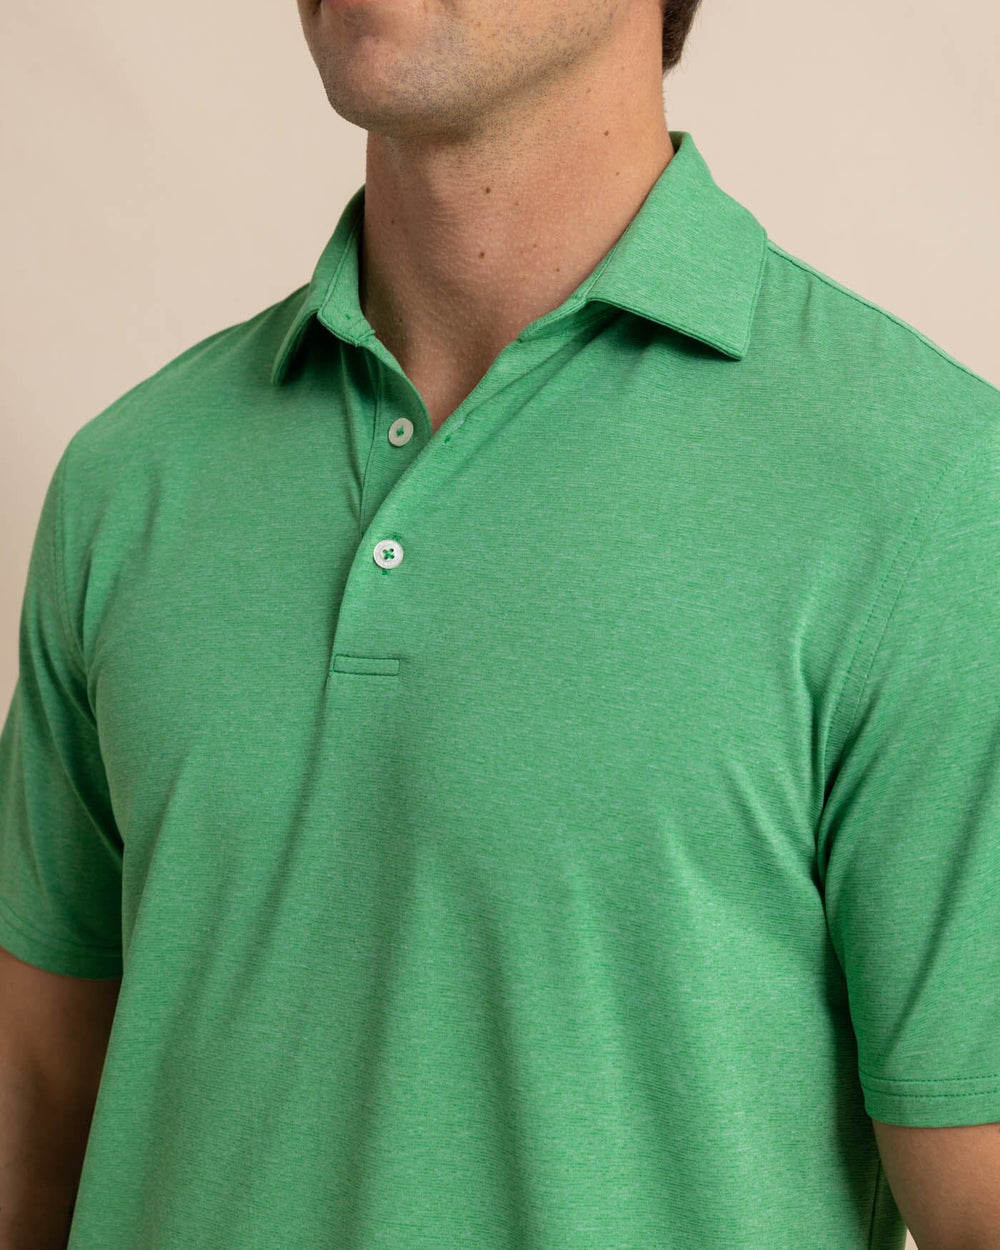 The detail view of the Southern Tide brrr-eeze-heather-performance-polo-shirt by Southern Tide - Heather Kelly Green